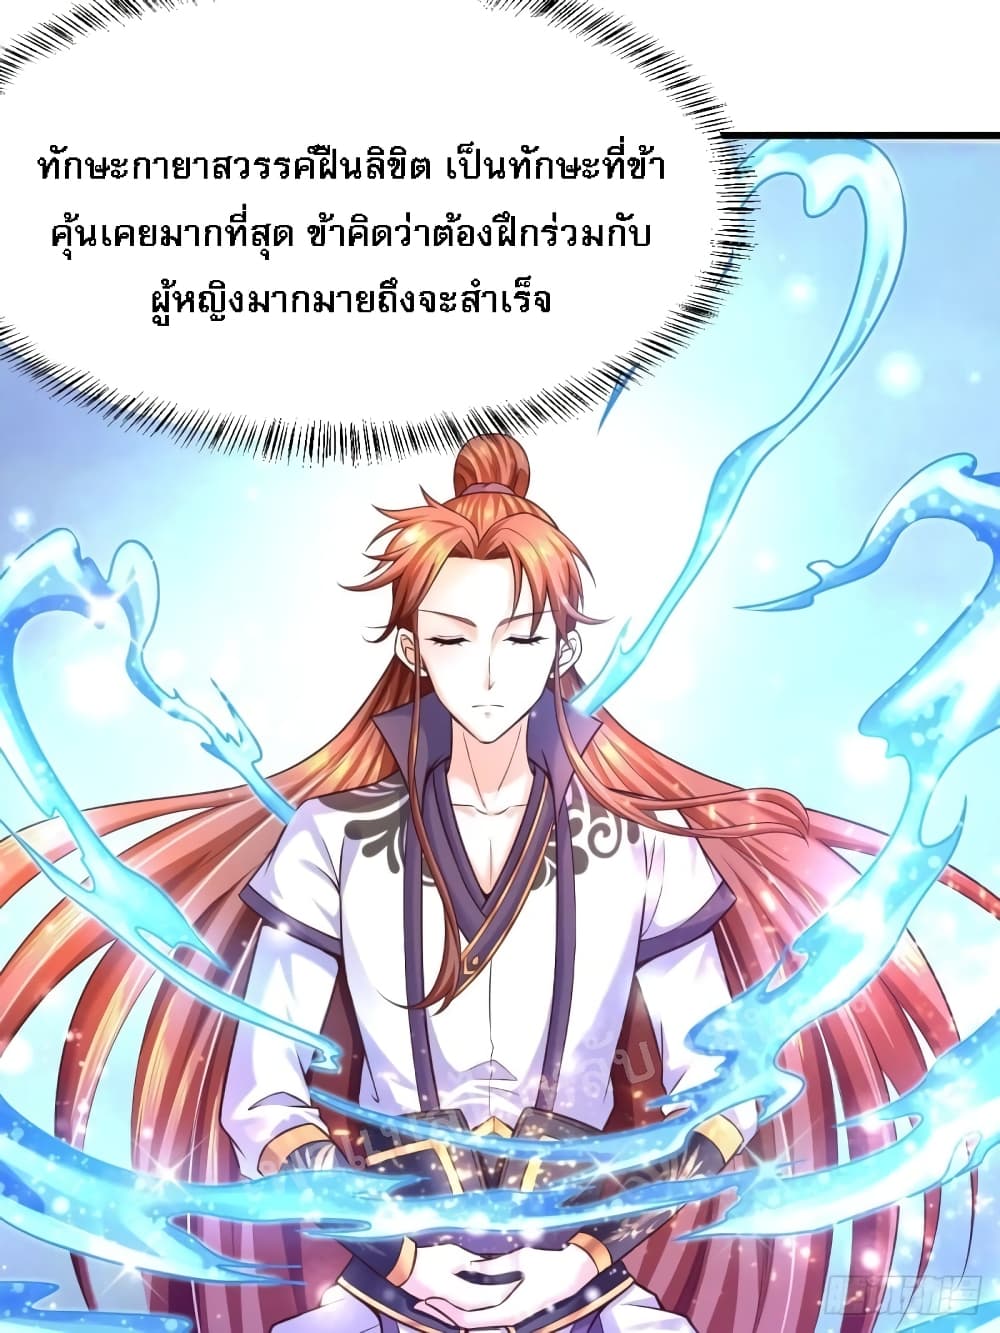 Rebirth of the Heavenly King 3 (14)